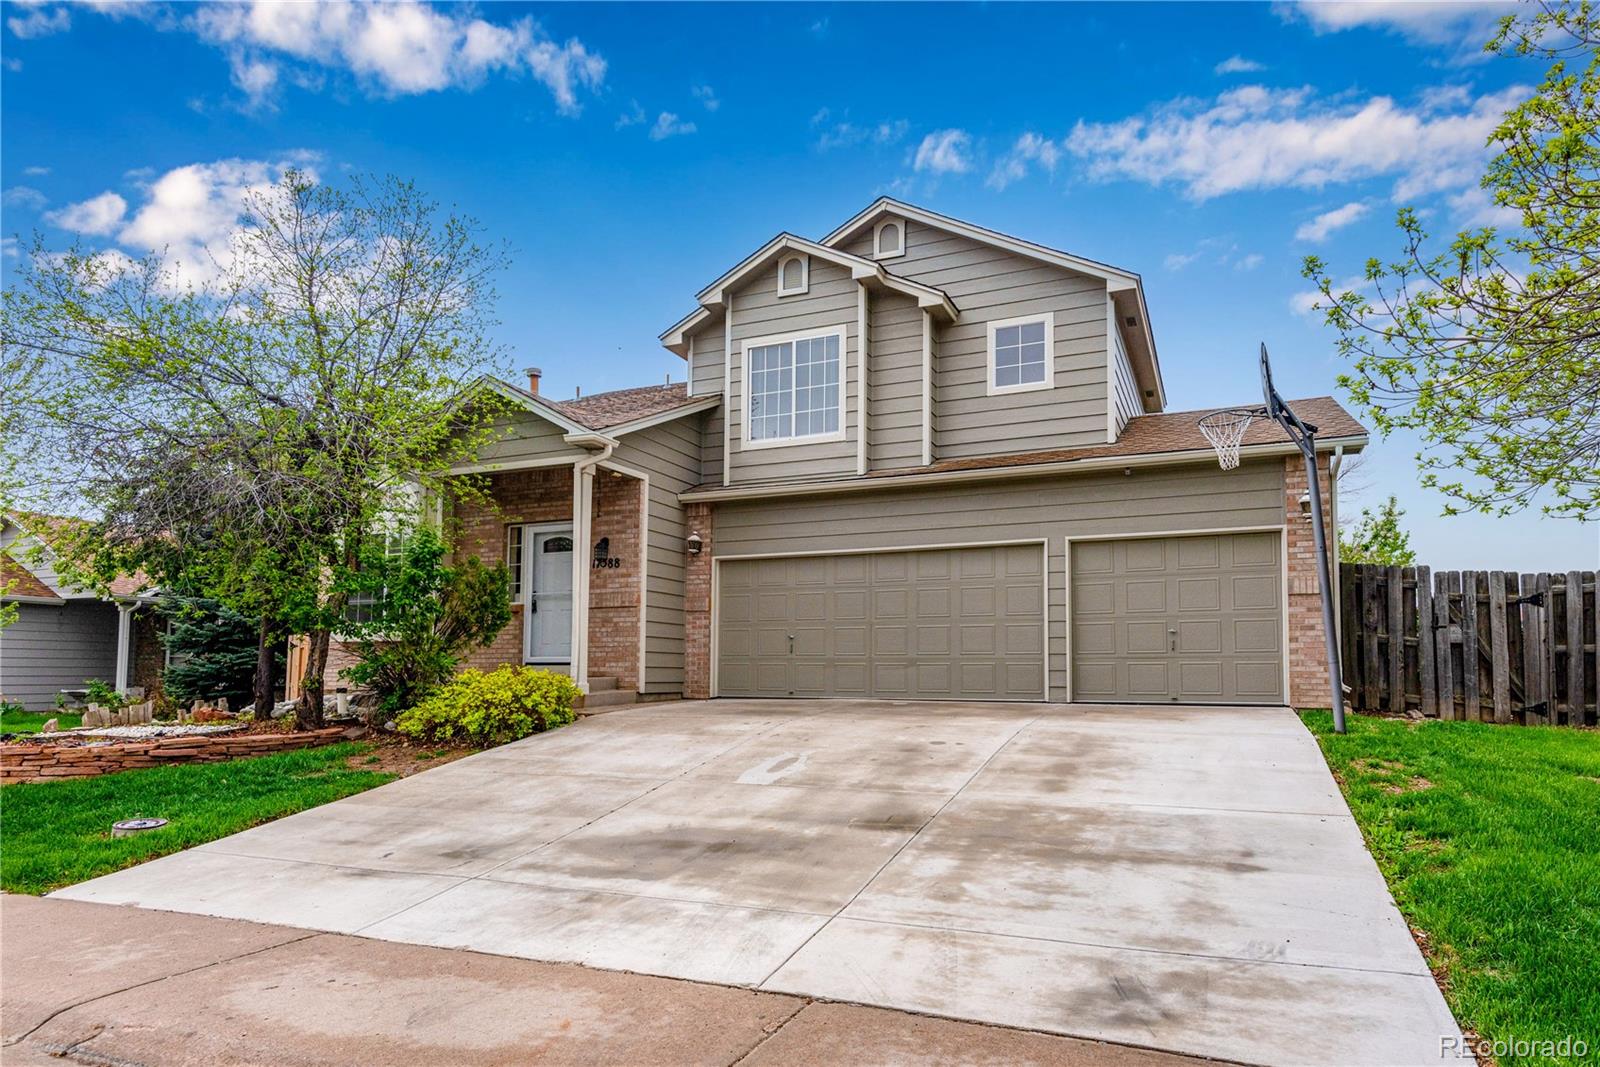 17588 e baker place, Aurora sold home. Closed on 2023-11-08 for $615,000.